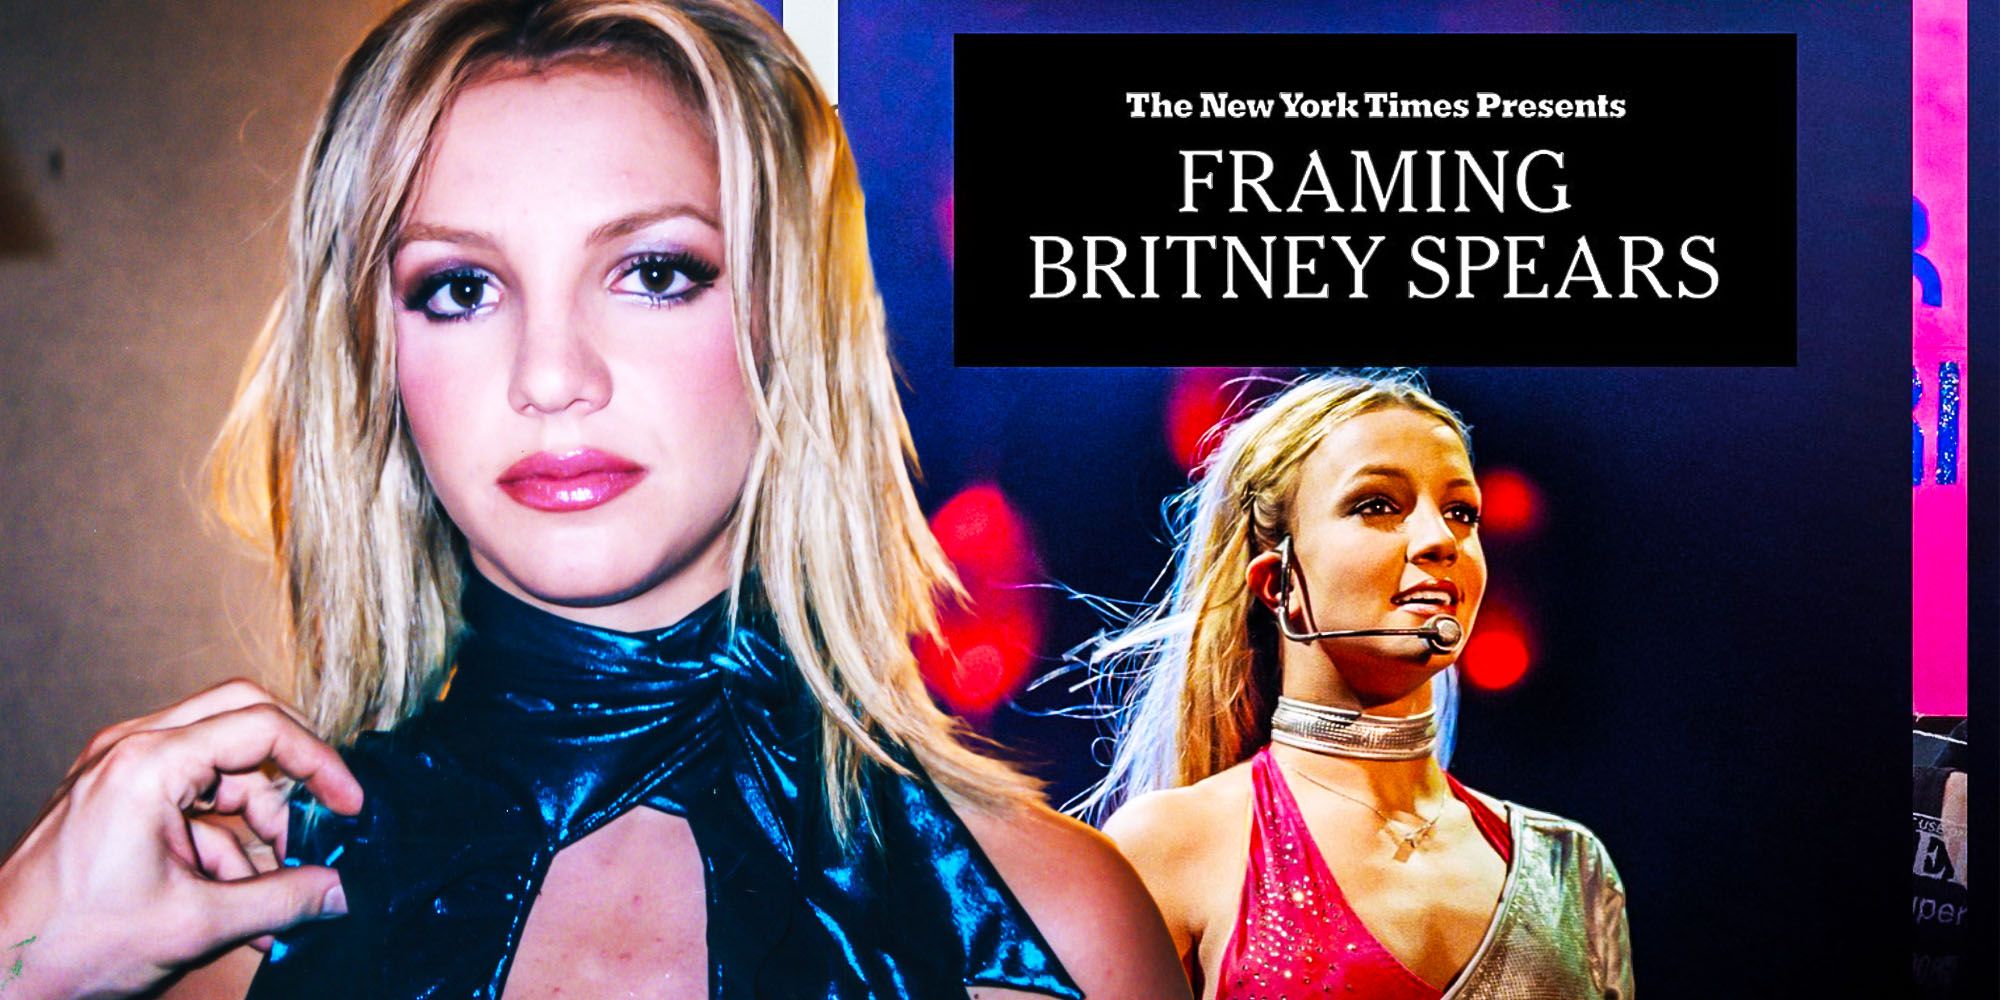 Framing Britney spears every update